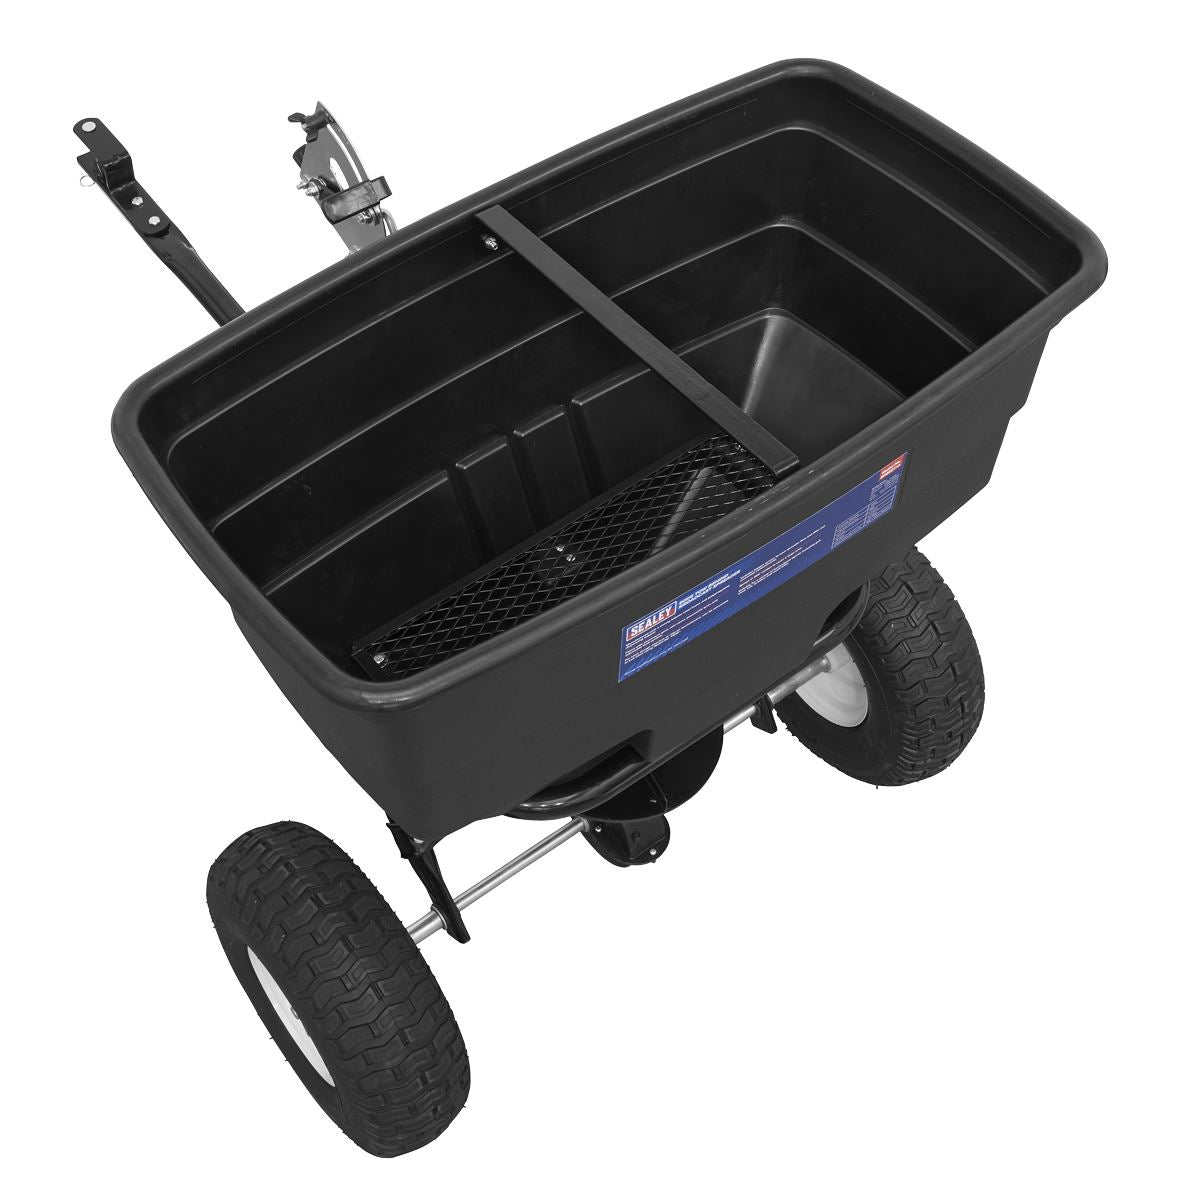 Sealey Broadcast Spreader 80kg Tow Behind